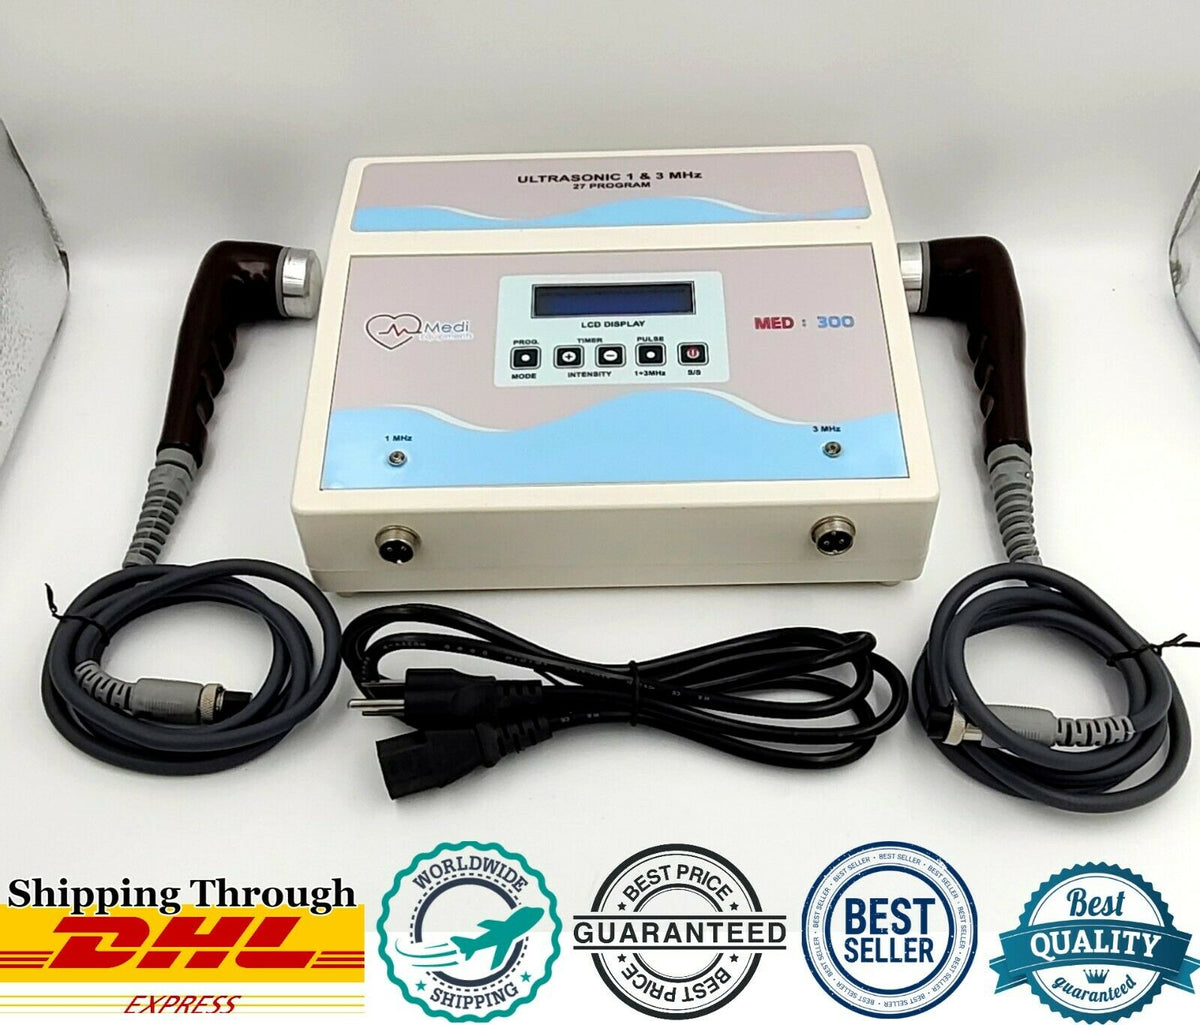 Original 1&3 MHz Ultrasound Therapy Unit for Pain Relief & Massage etc.